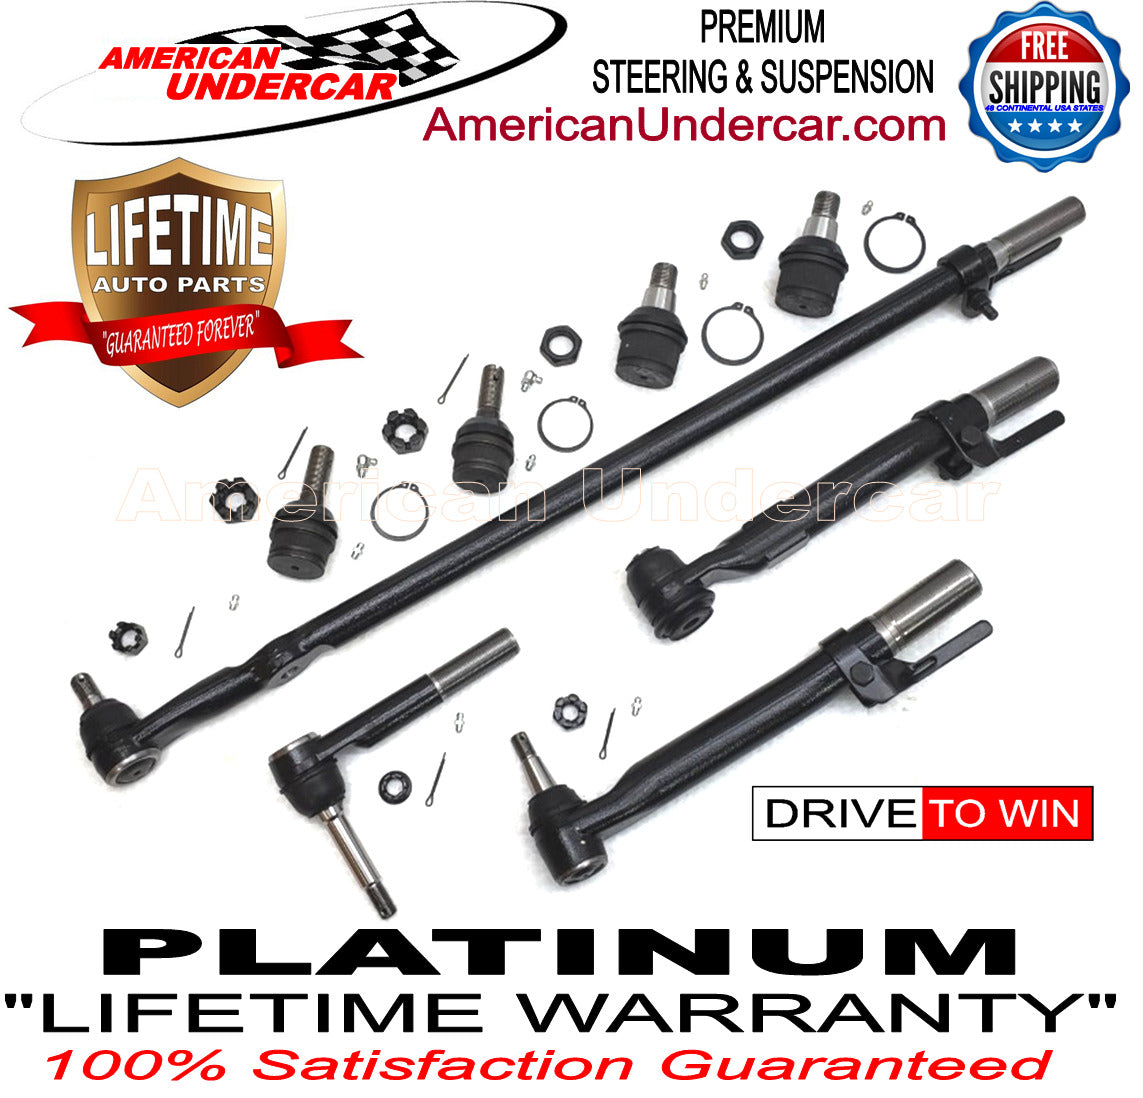 Lifetime Drag Link Ball Joint Tie Rod Kit for 2005-2010 Ford F450, F550 Super Duty 2WD